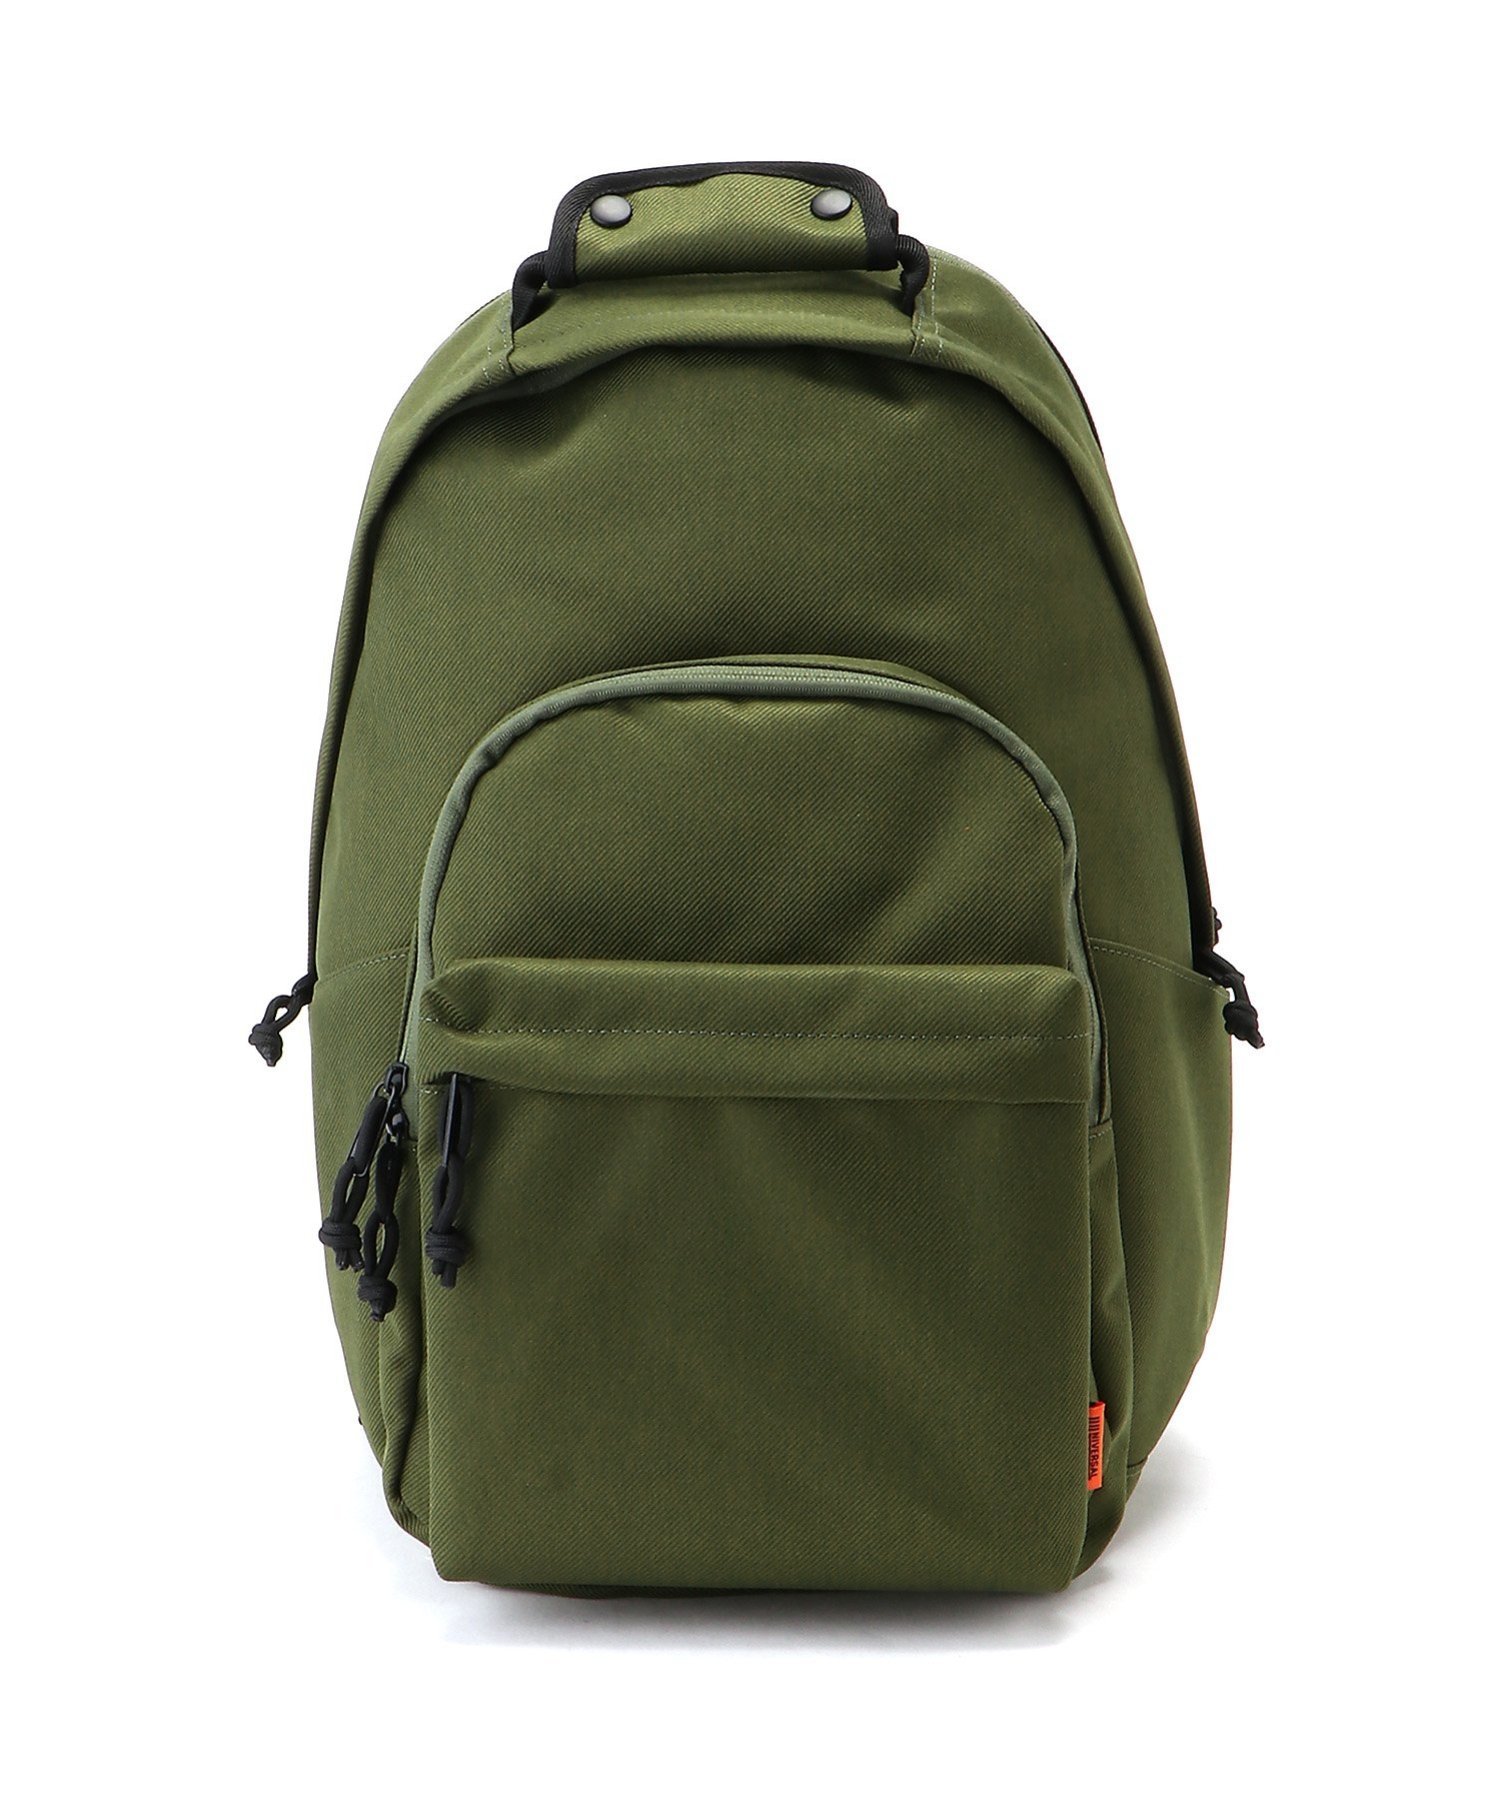 【SALE／10%OFF】ADPOSION ADPOSION/(W)【UNIVERSAL OVERALL】3LAYER Backpack テットオム バッグ リュック・バックパック カーキ ネイビー ブラック ベージュ【送料無料】